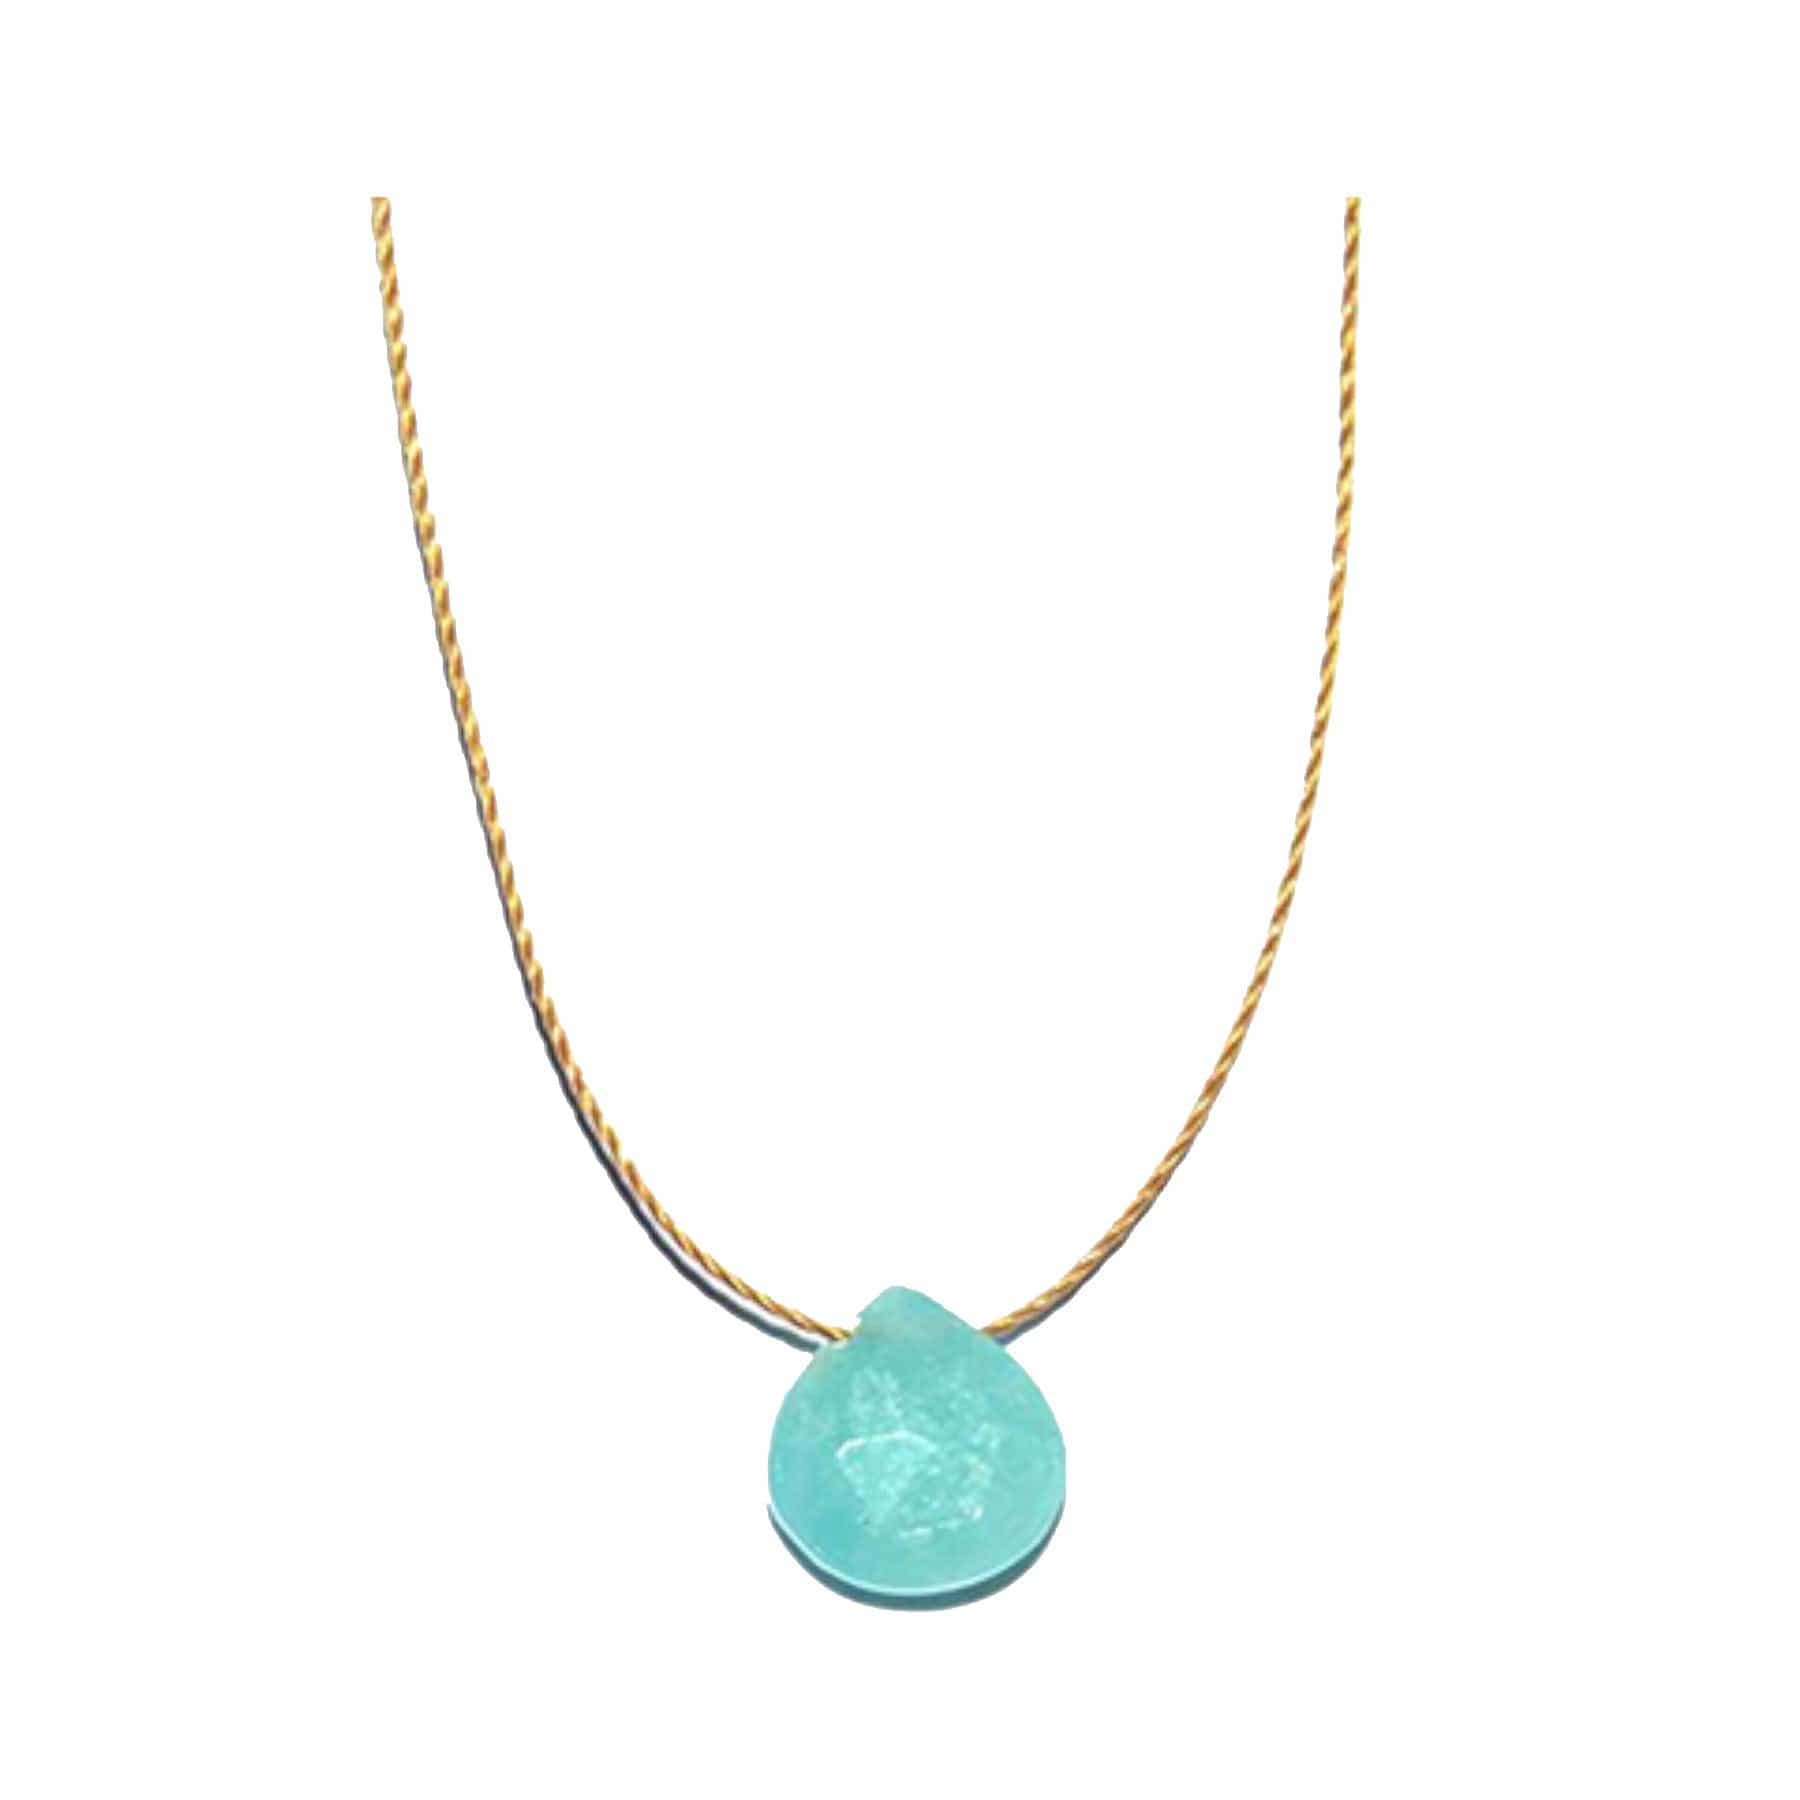 Gold necklace with a large aquamarine pendant on a white background.